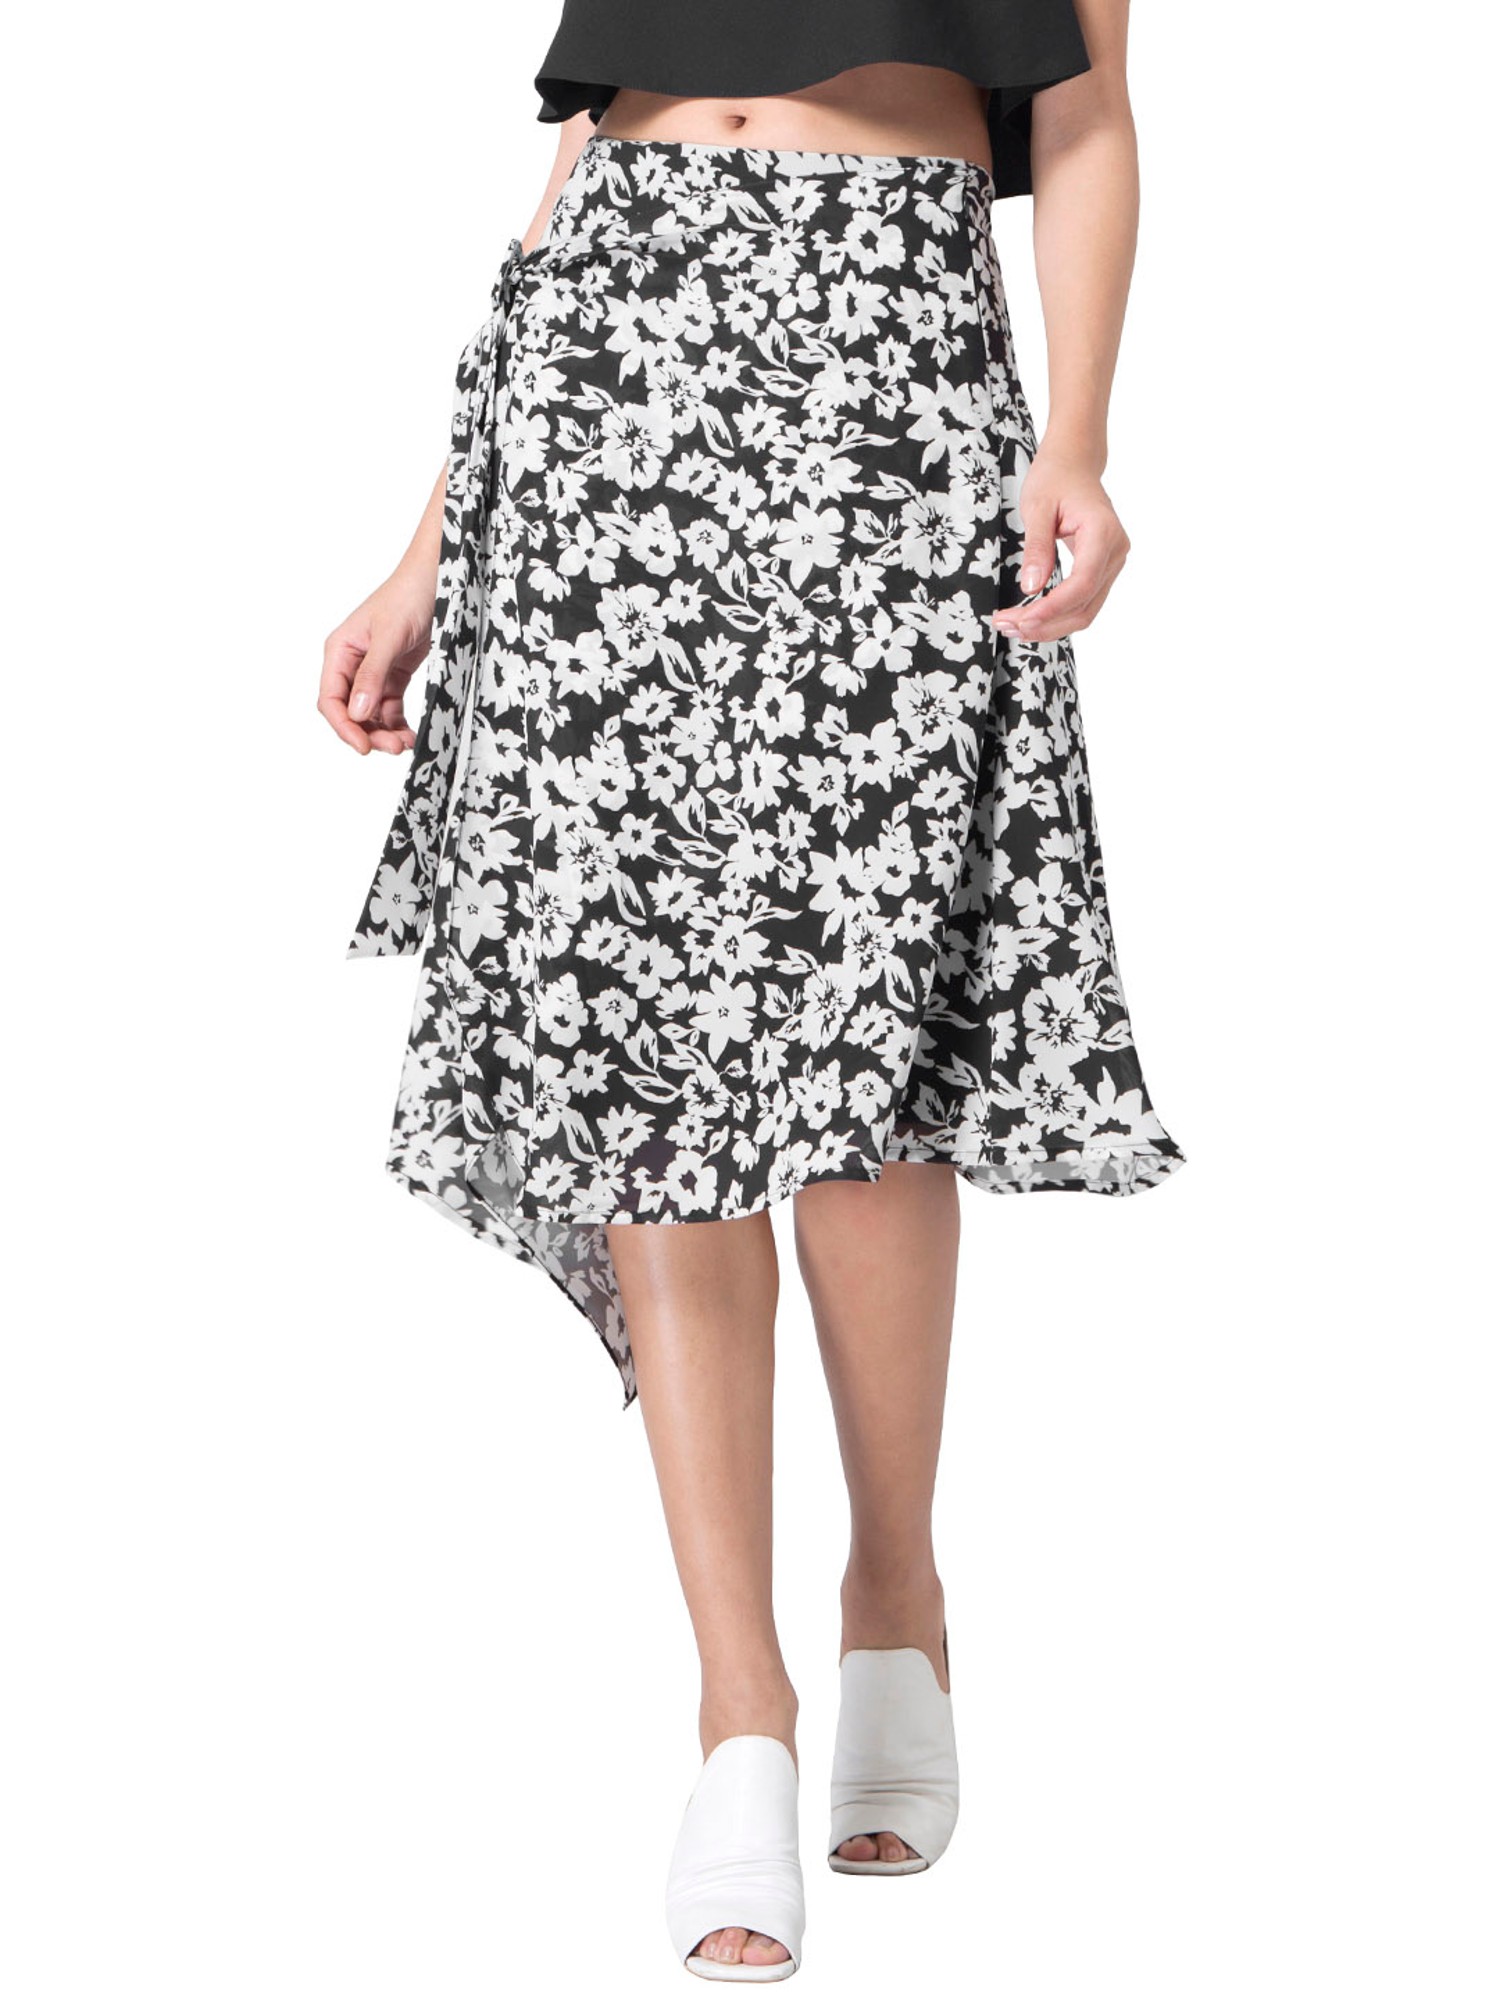 FabAlley Skirts  Buy FabAlley Dusty Pink Floral Knee Length Skirt Online   Nykaa Fashion